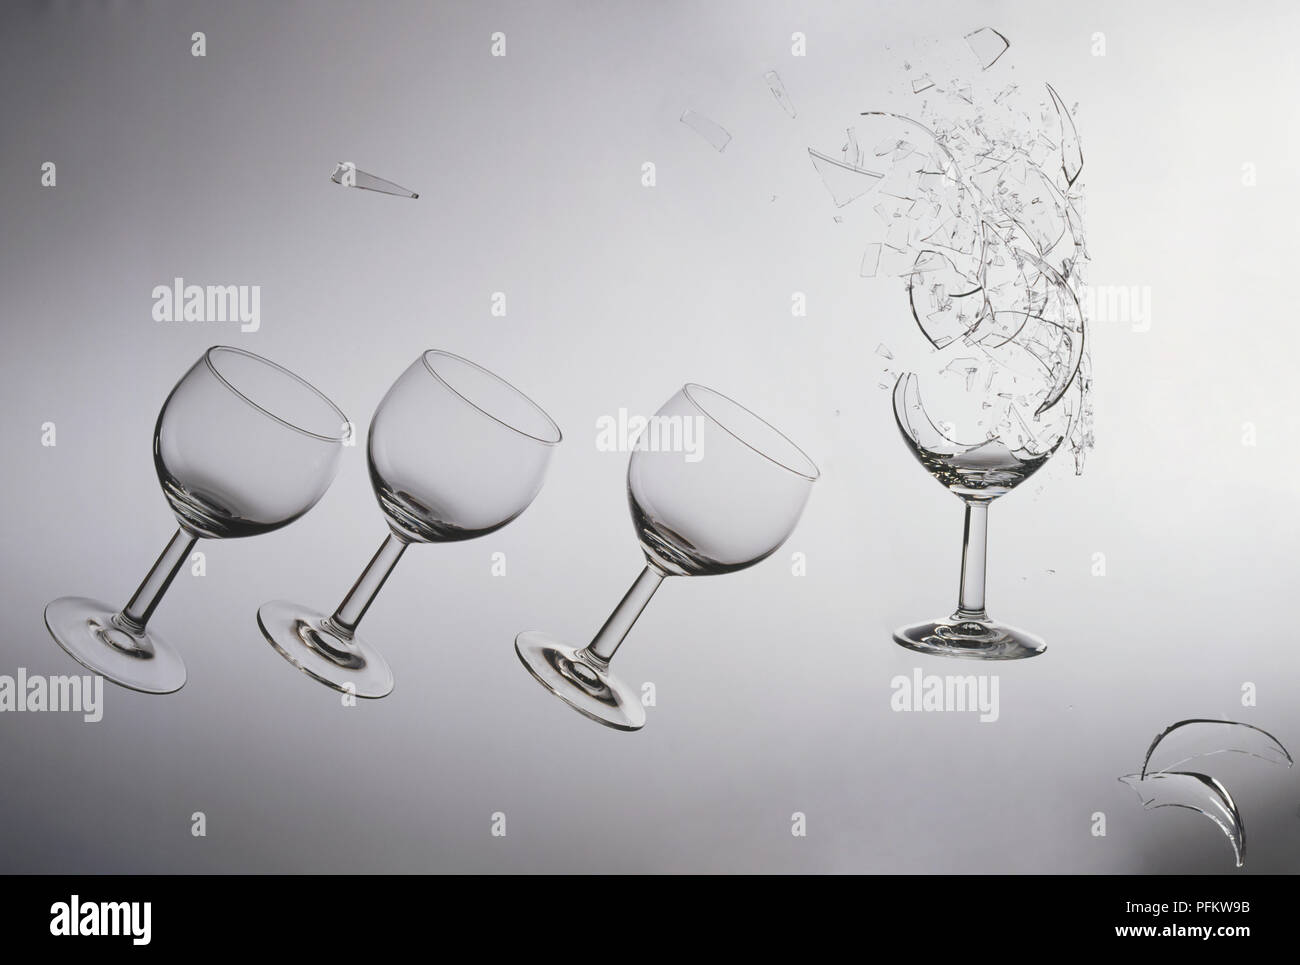 Photographic print depicting four wine glasses, one of them broken with the base surrounded by pieces of glass. Stock Photo